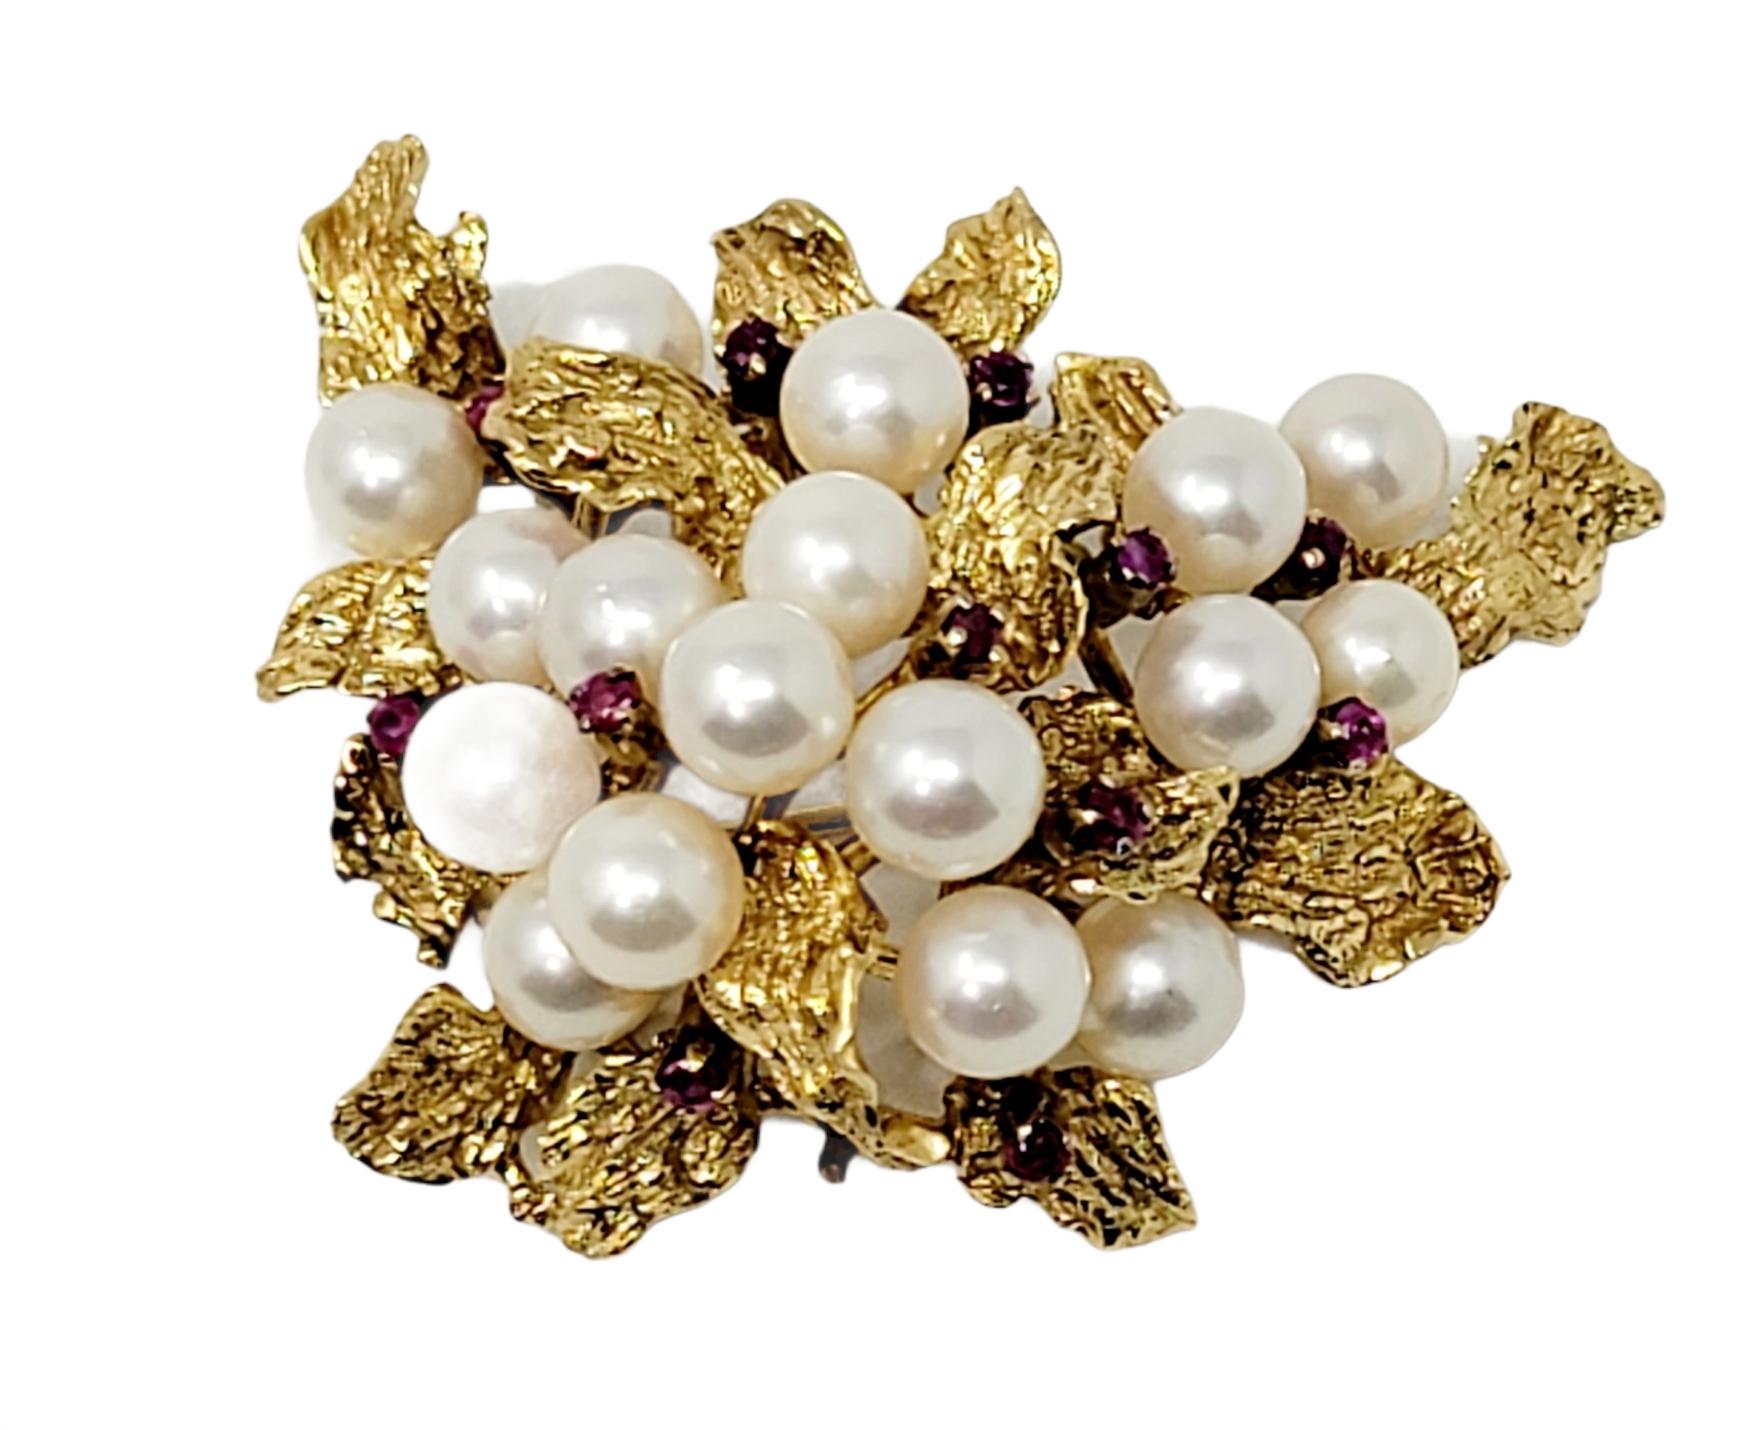 Vintage 14 Karat Yellow Gold Large Leaf Cluster Brooch with Pearls and Rubies For Sale 3